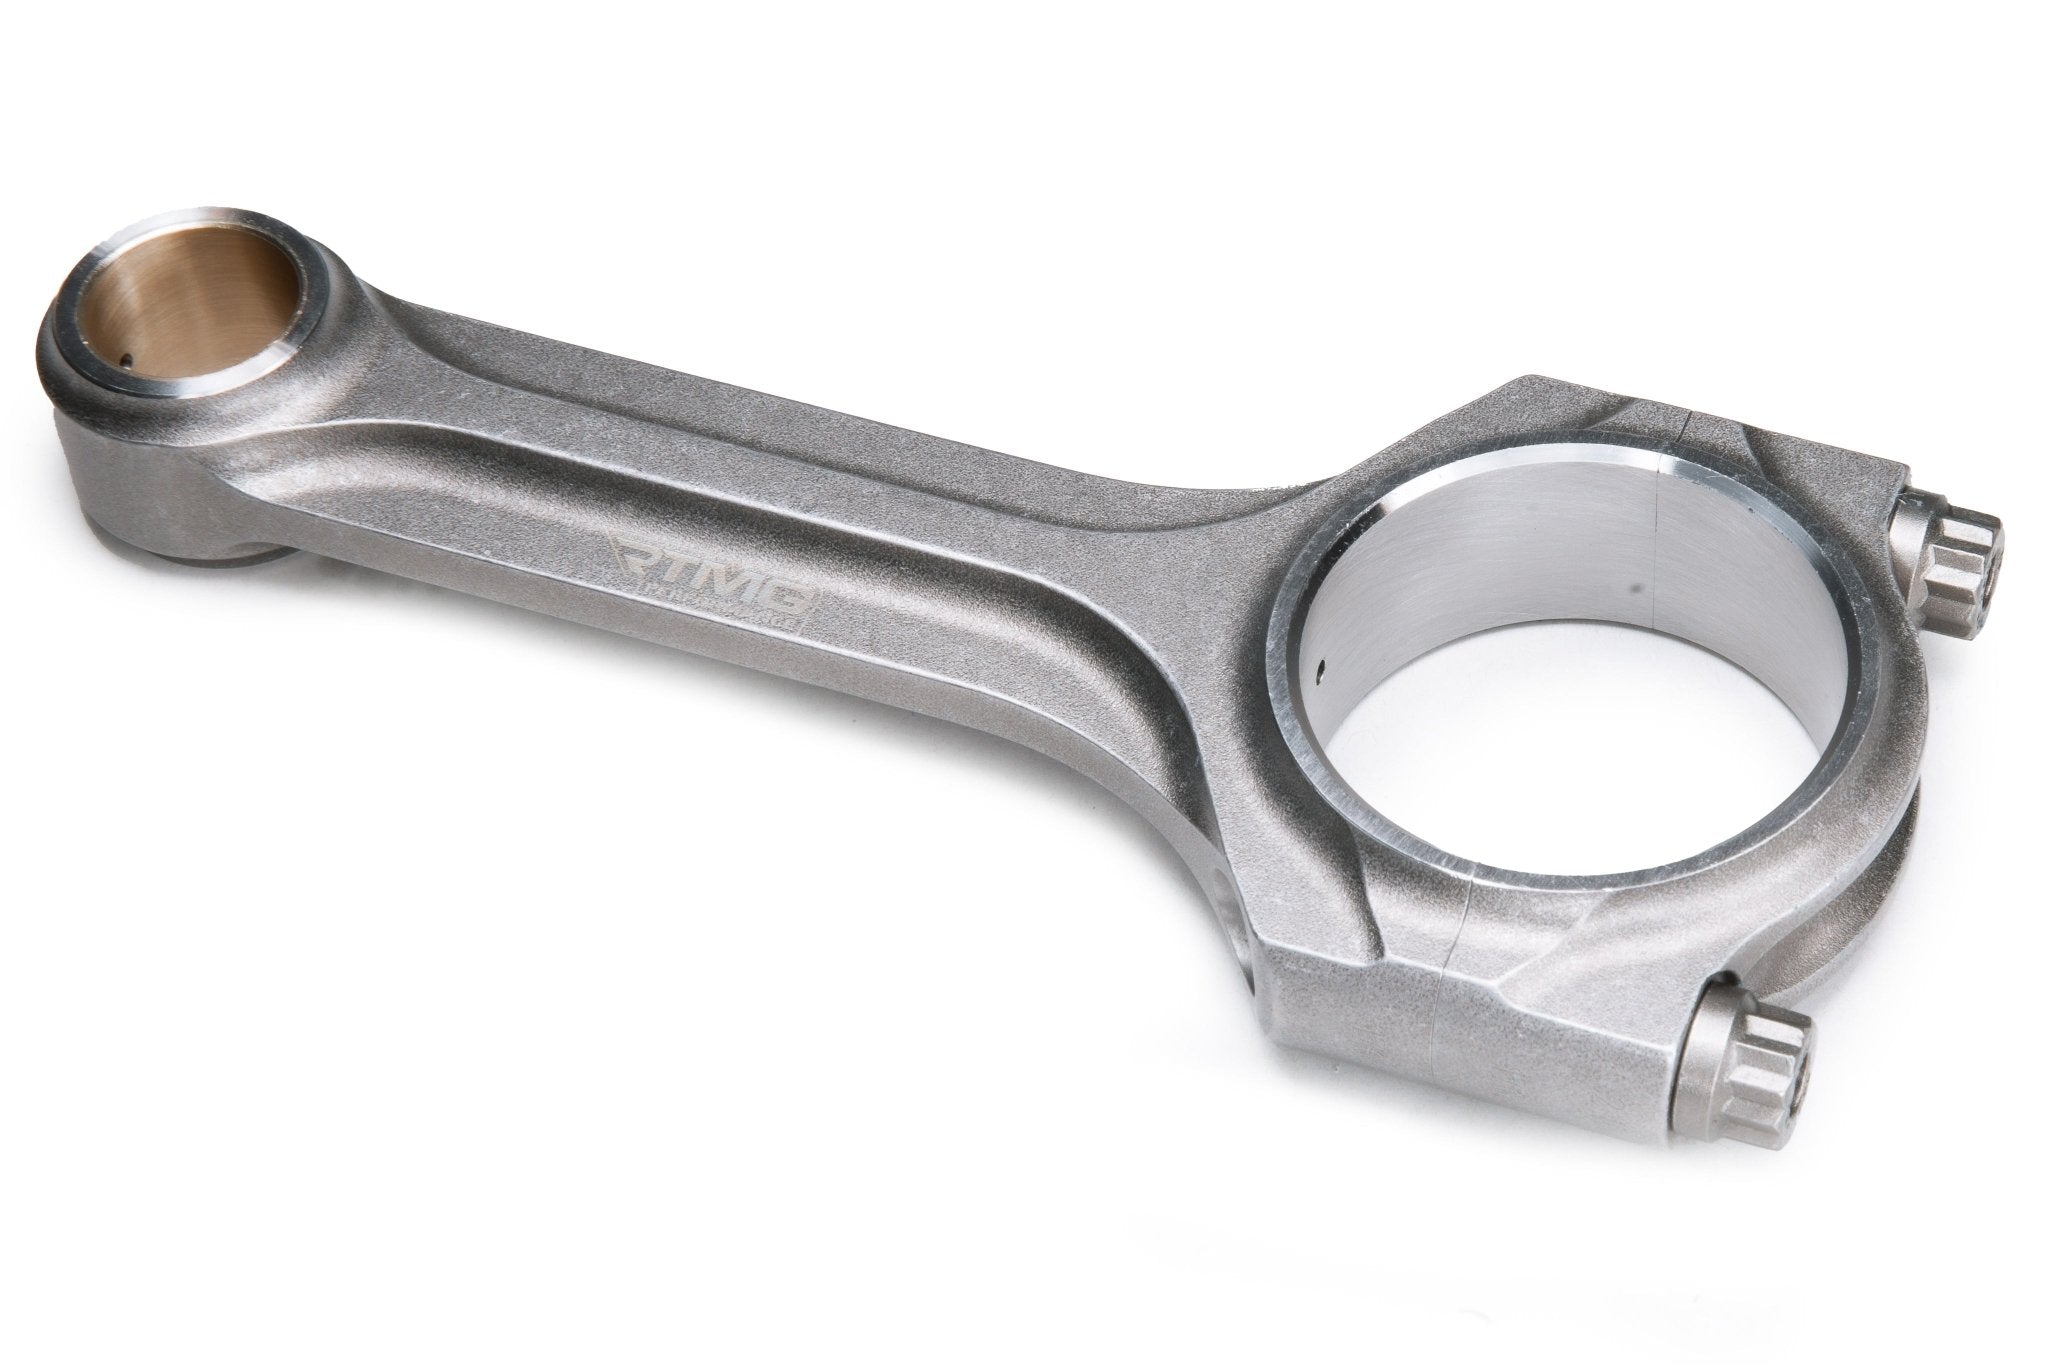 Connecting Rods Set X-Beam for 2.0 TSI EA888 Gen 2 - Up to 1000HP+ ( 21mm Piston Pin Size ) - RTMG Performance